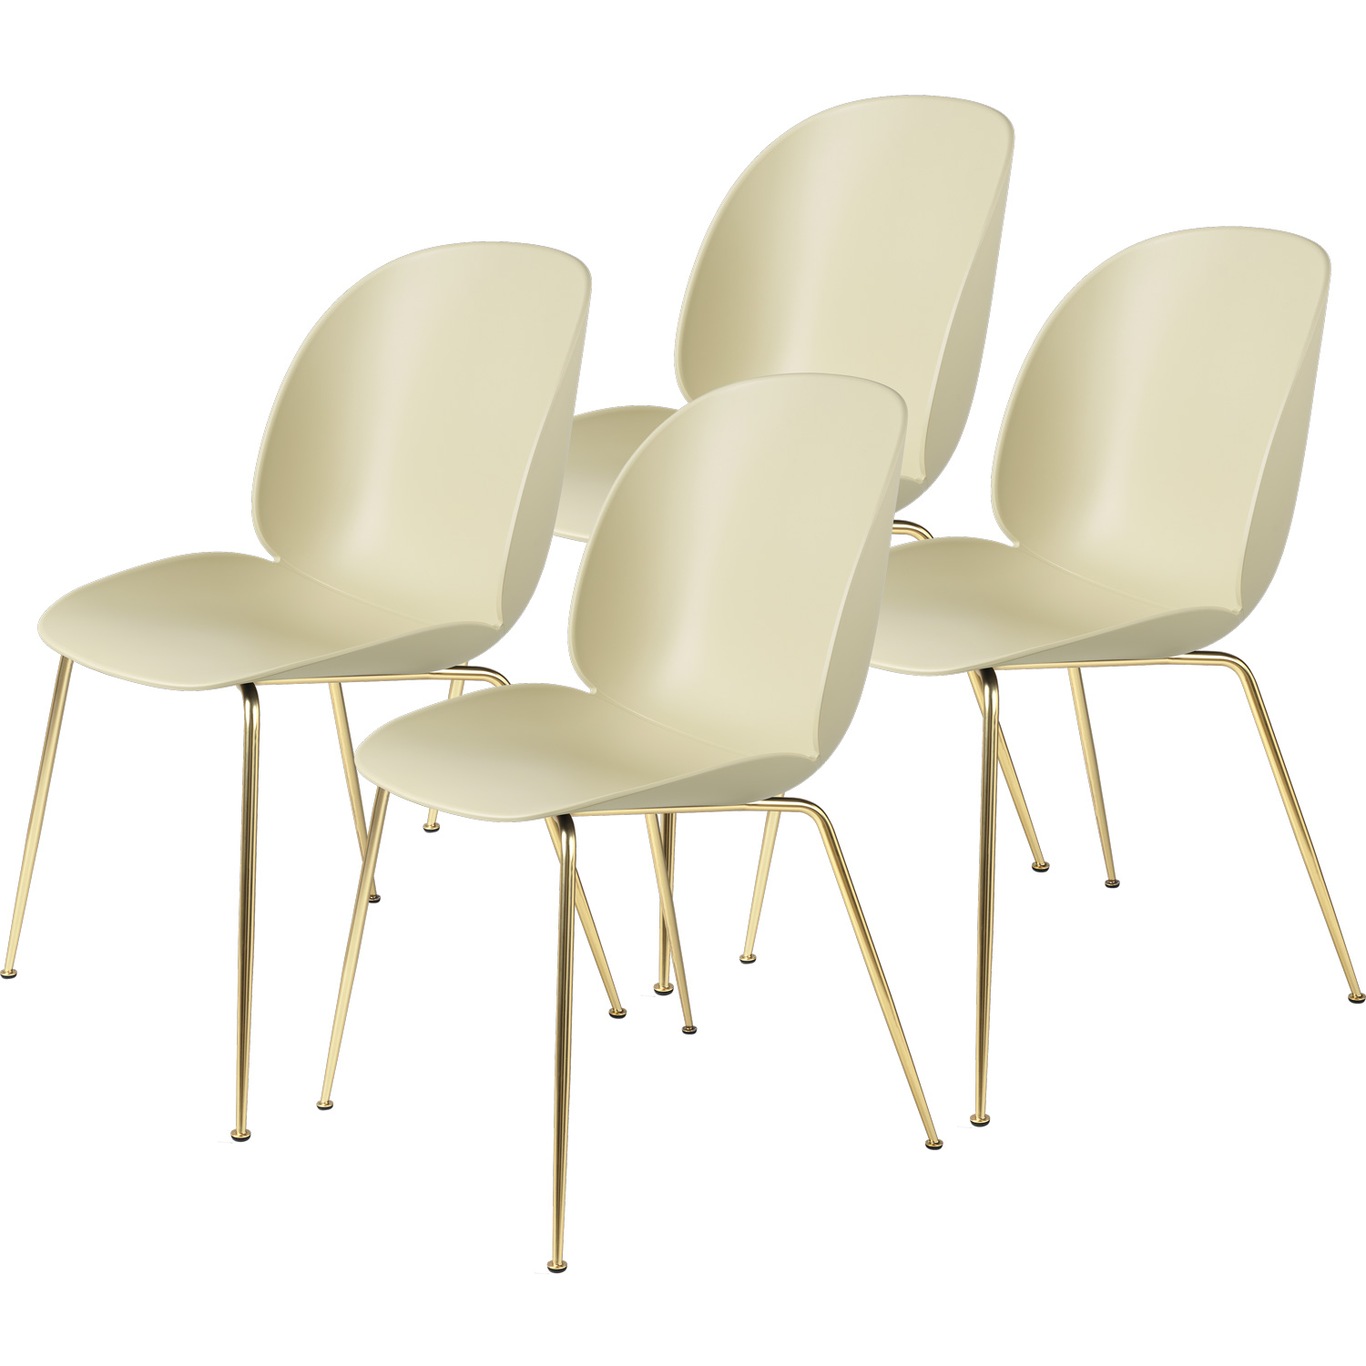 Beetle Chair Un-upholstered 4-pack Conic Base Brass, Pastel Green